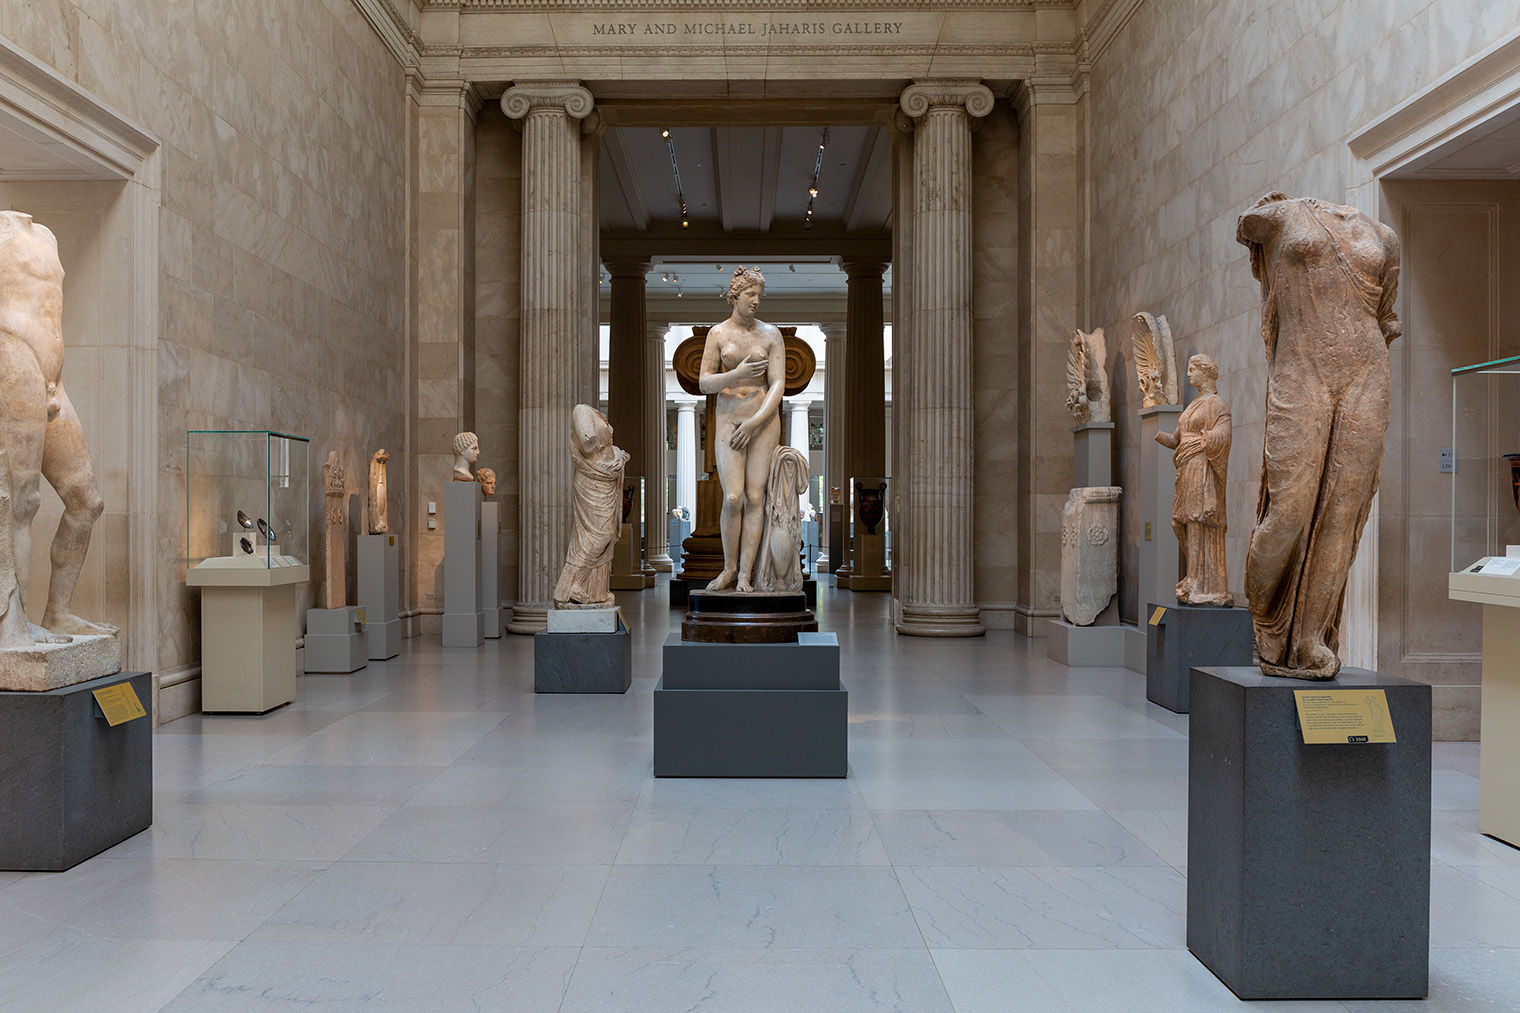 A marble statue of Aphrodite stands in the middle of the Greek and Roman hall surrounding by other statues and sculptures. She is standing upright with her hands moving to cover her breasts and pubic area. 